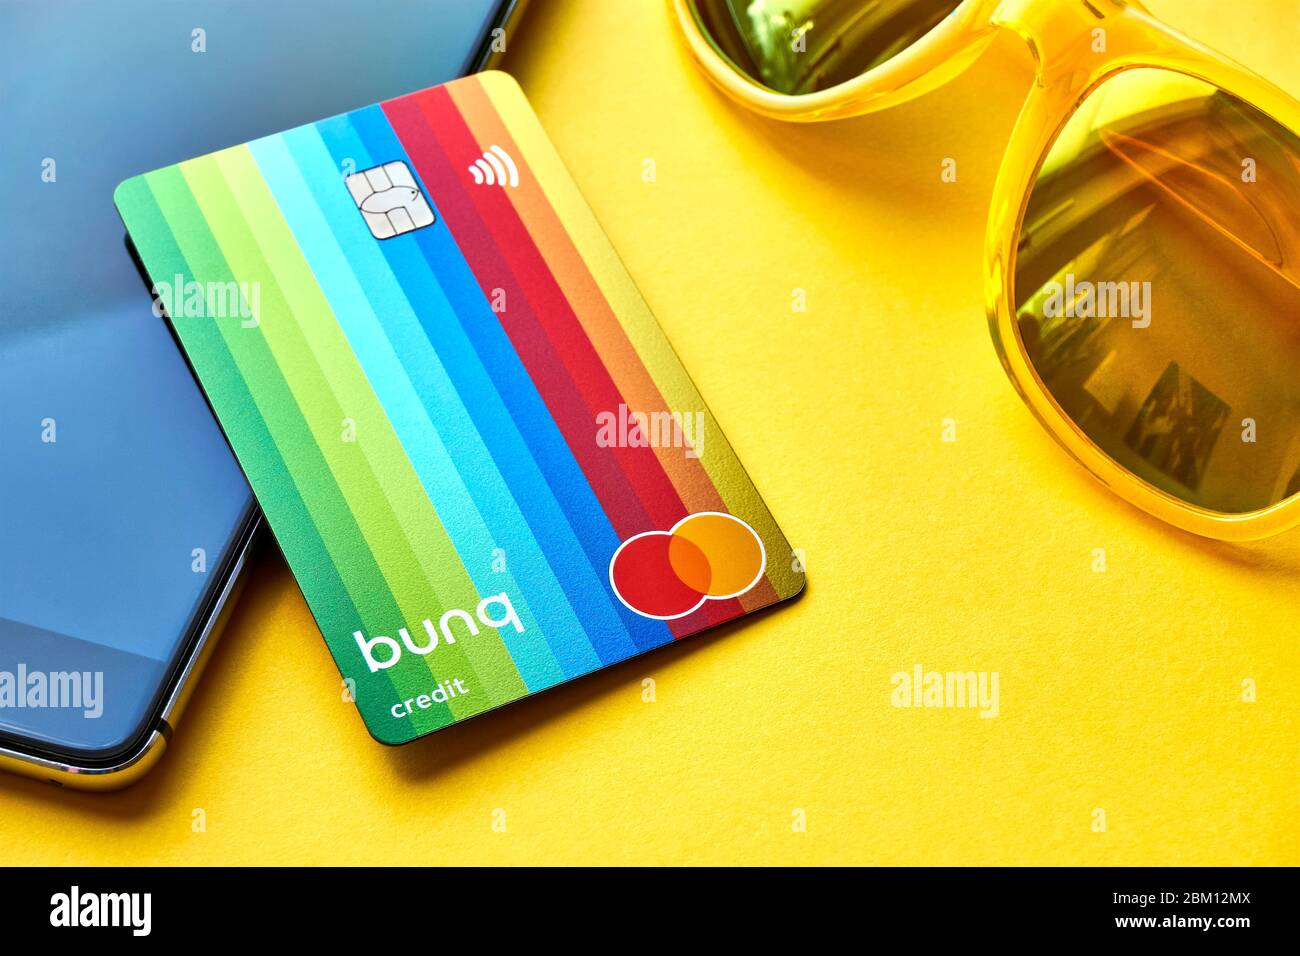 Franeker, The Netherlands - March 1 2020: The bunq Travel Card is a prepaid Mastercard credit card. Bunq is a dutch, internationally active neobank. Stock Photo